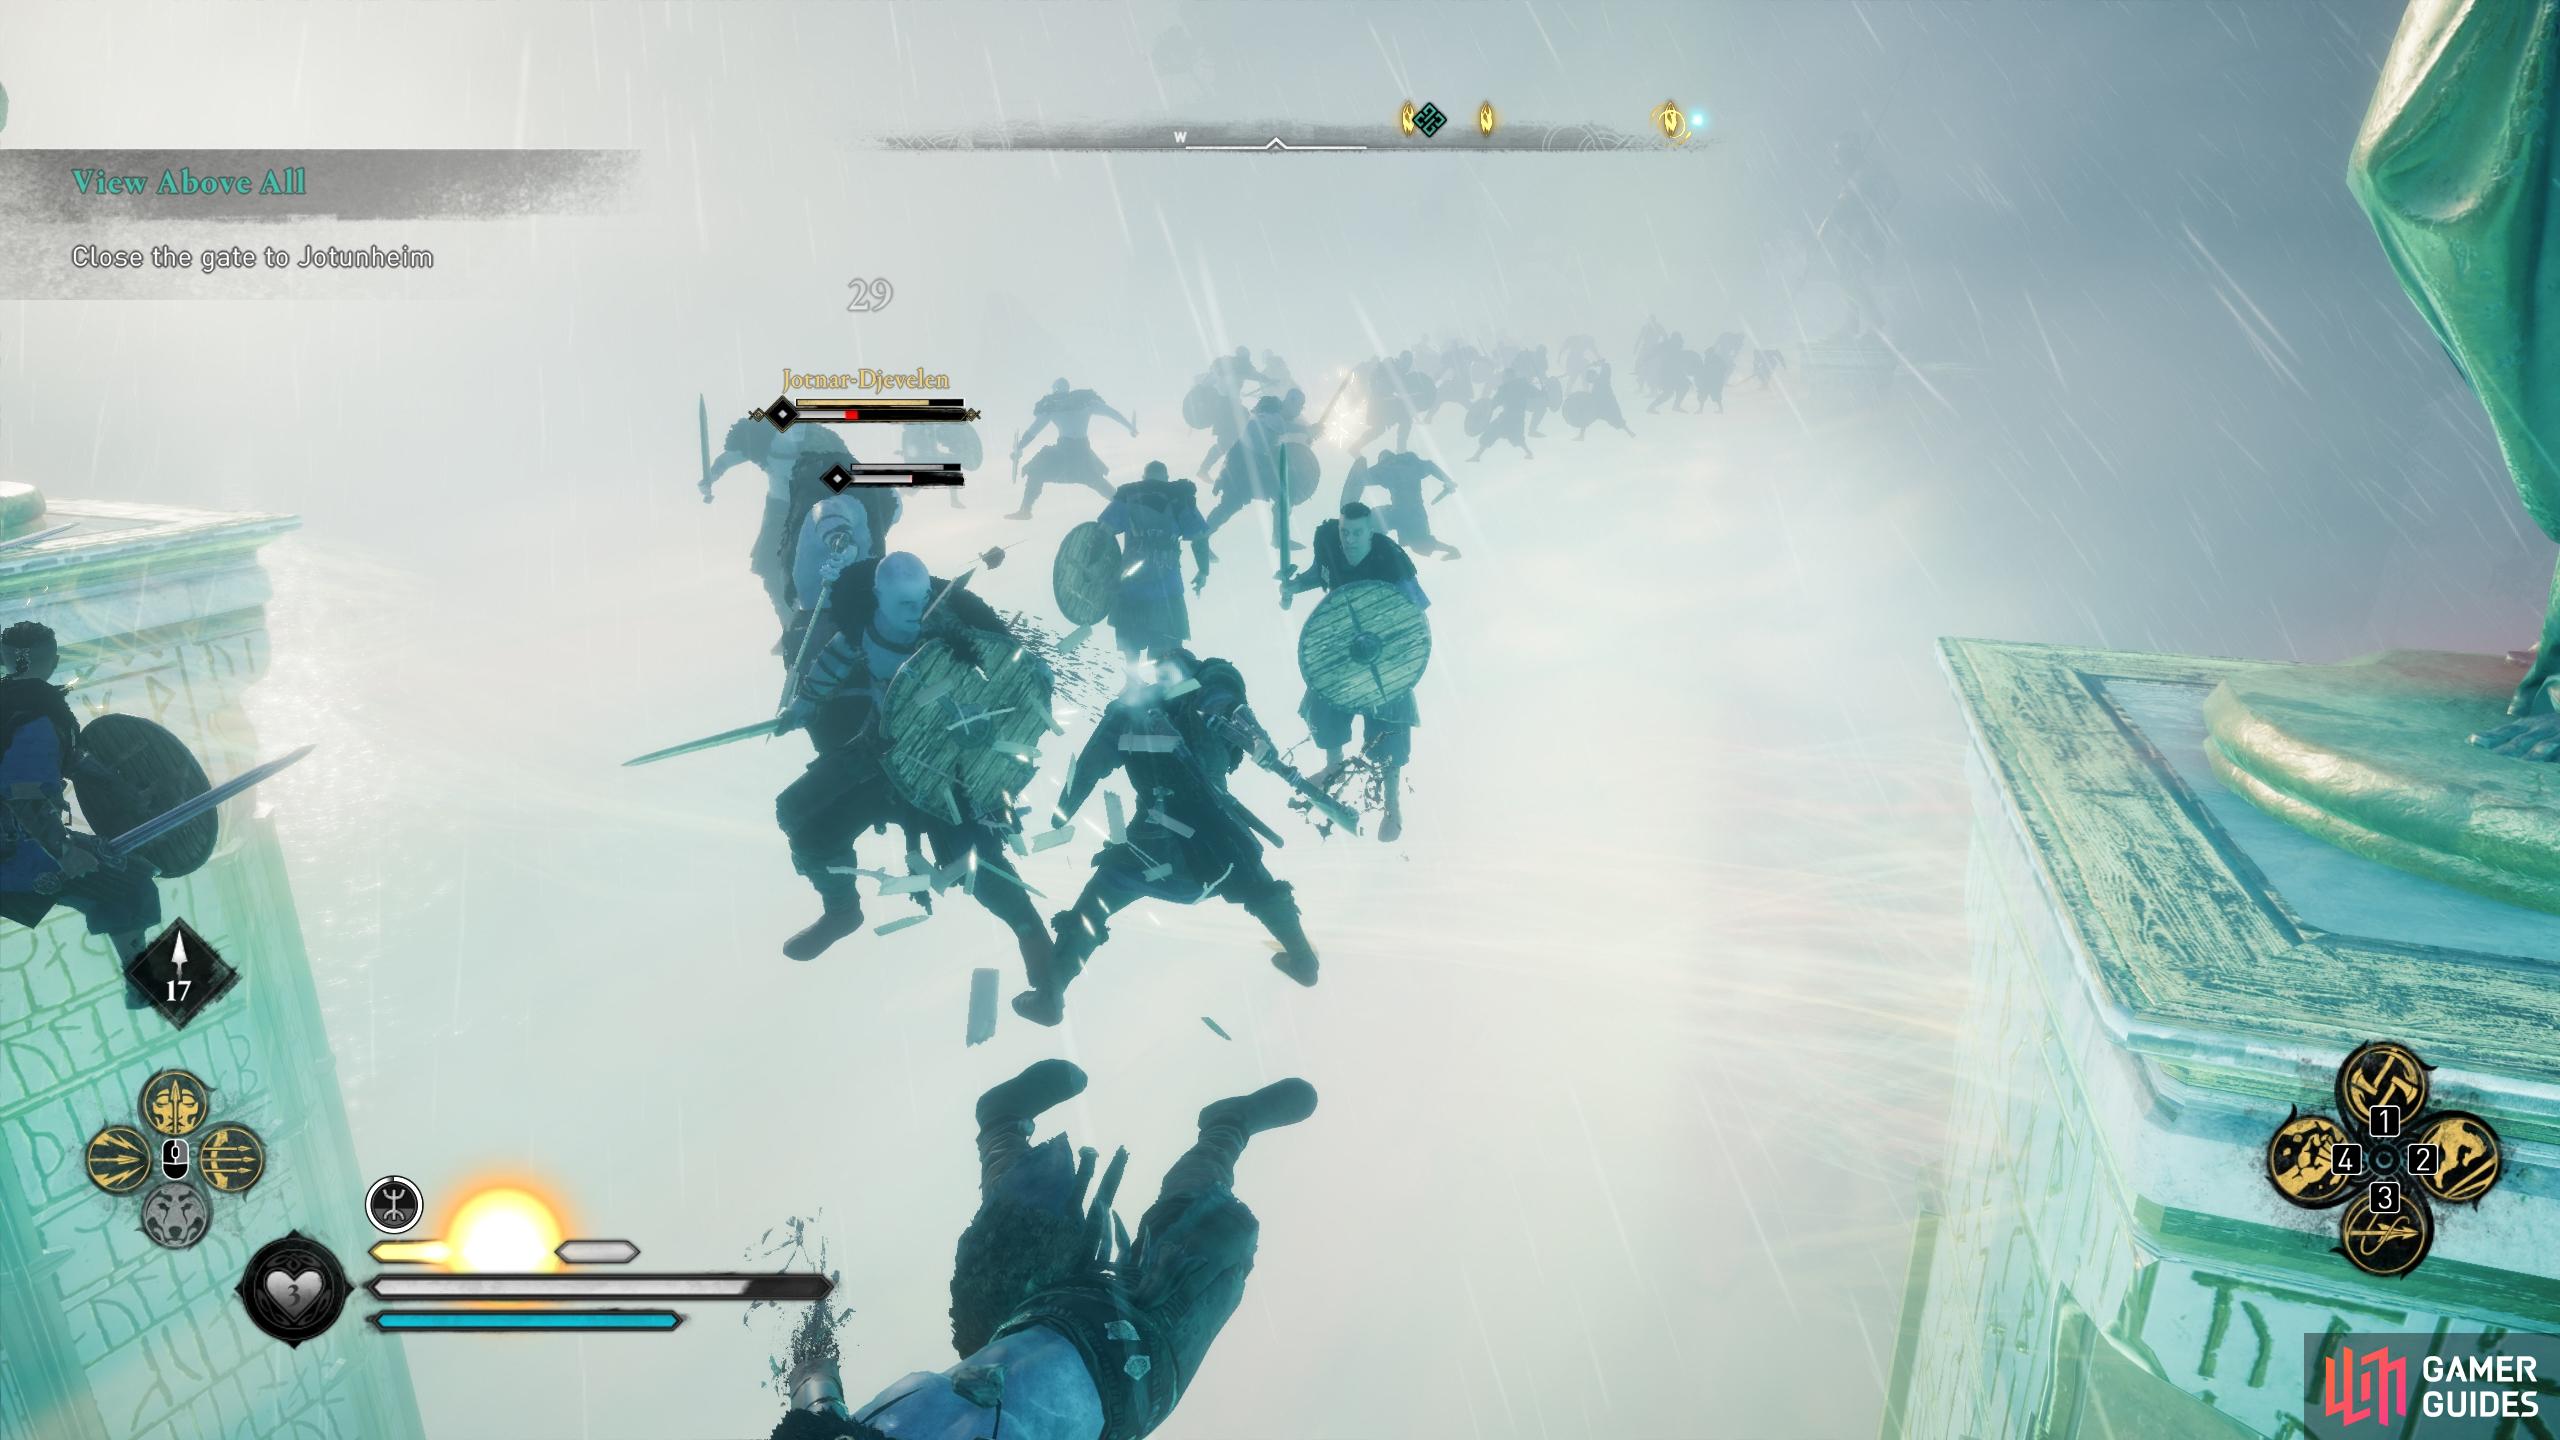 You can fight as many giants as you want on the bridge, but you main goal is to reach Heimdalls Tower.